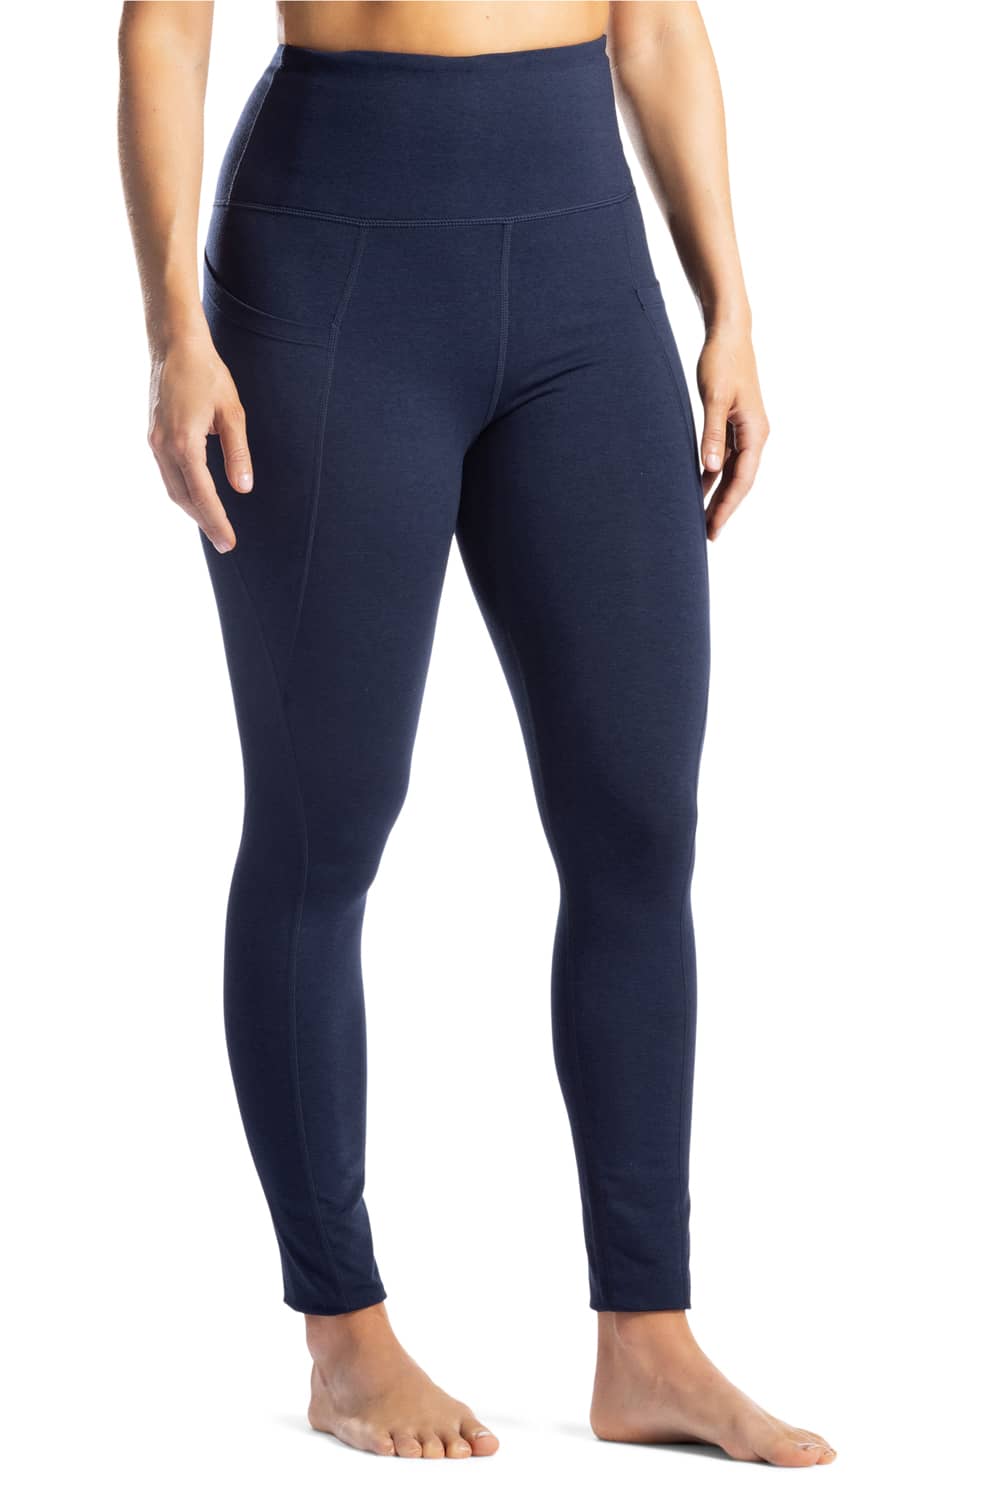  COMVALUE Leggings for Women Women's Hip Curling Sweat Wicking  Exercise Pants Sexy Hip Revealing Women's Bottoming Yoga Pants : Sports &  Outdoors